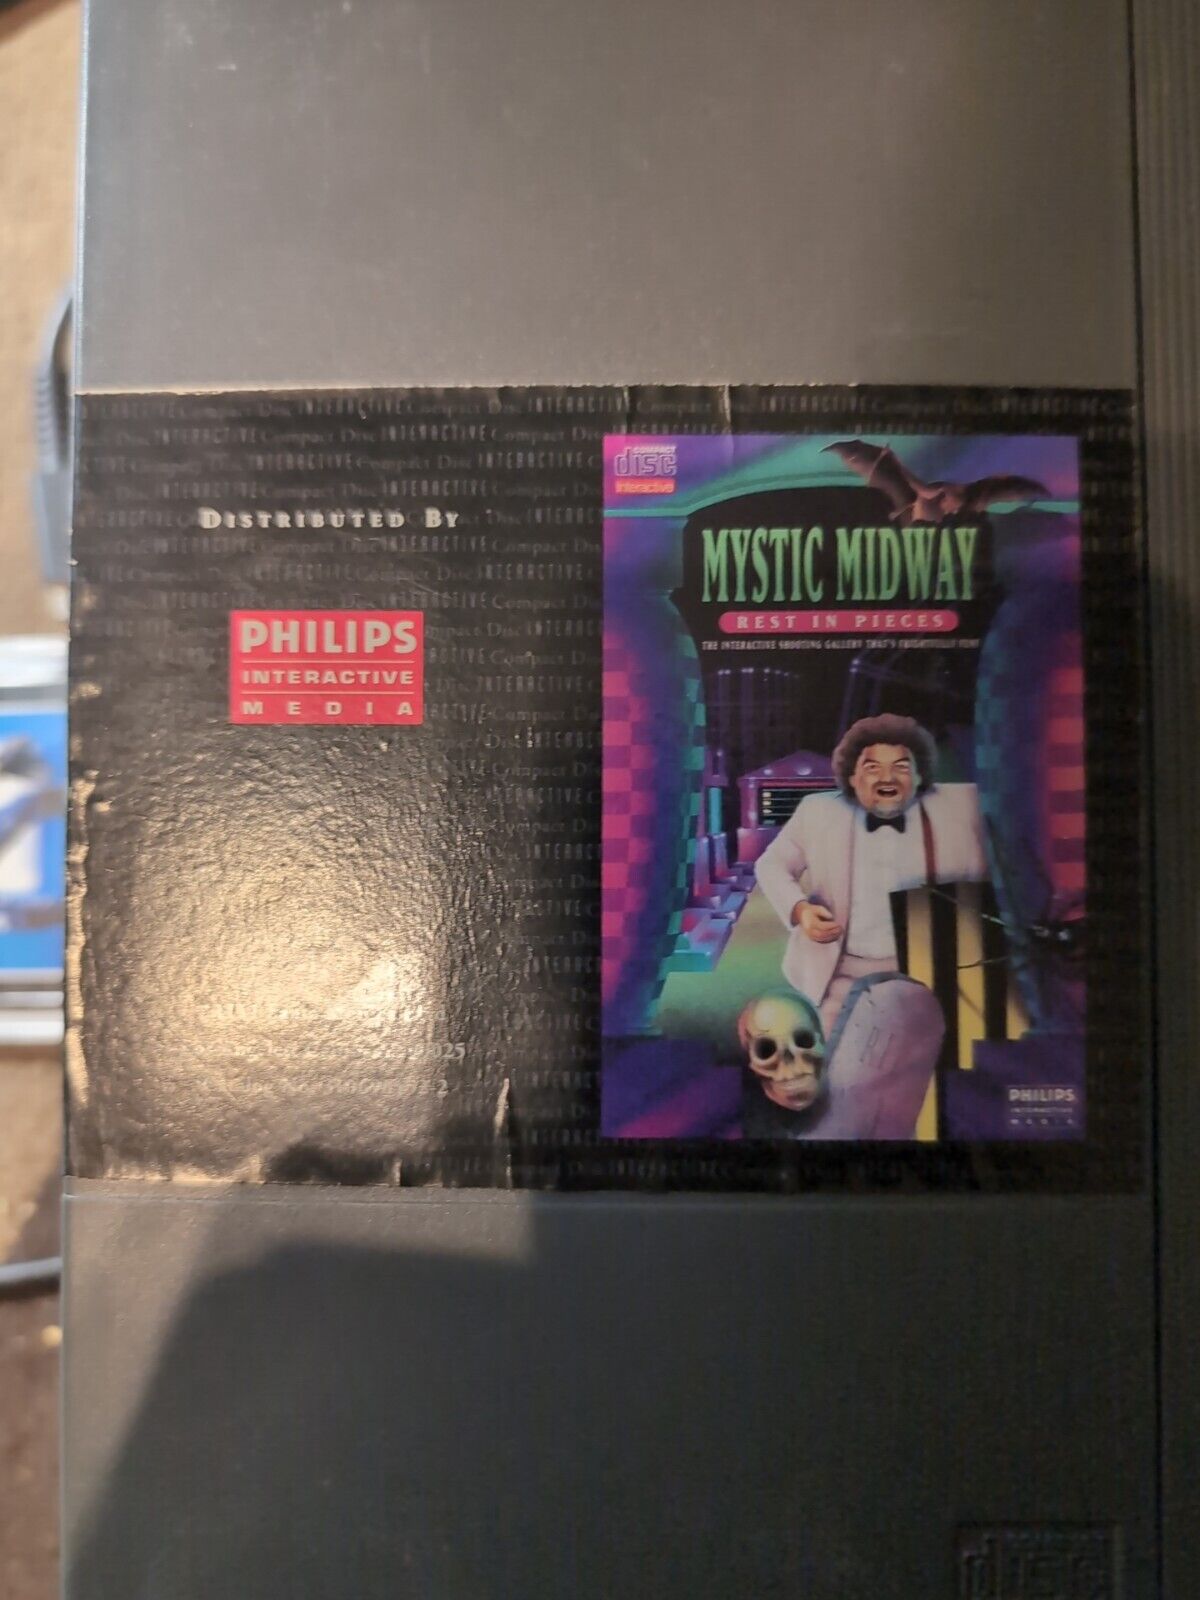 Mystic Midway: Rest in Pieces (Philips CD-i, 1992)